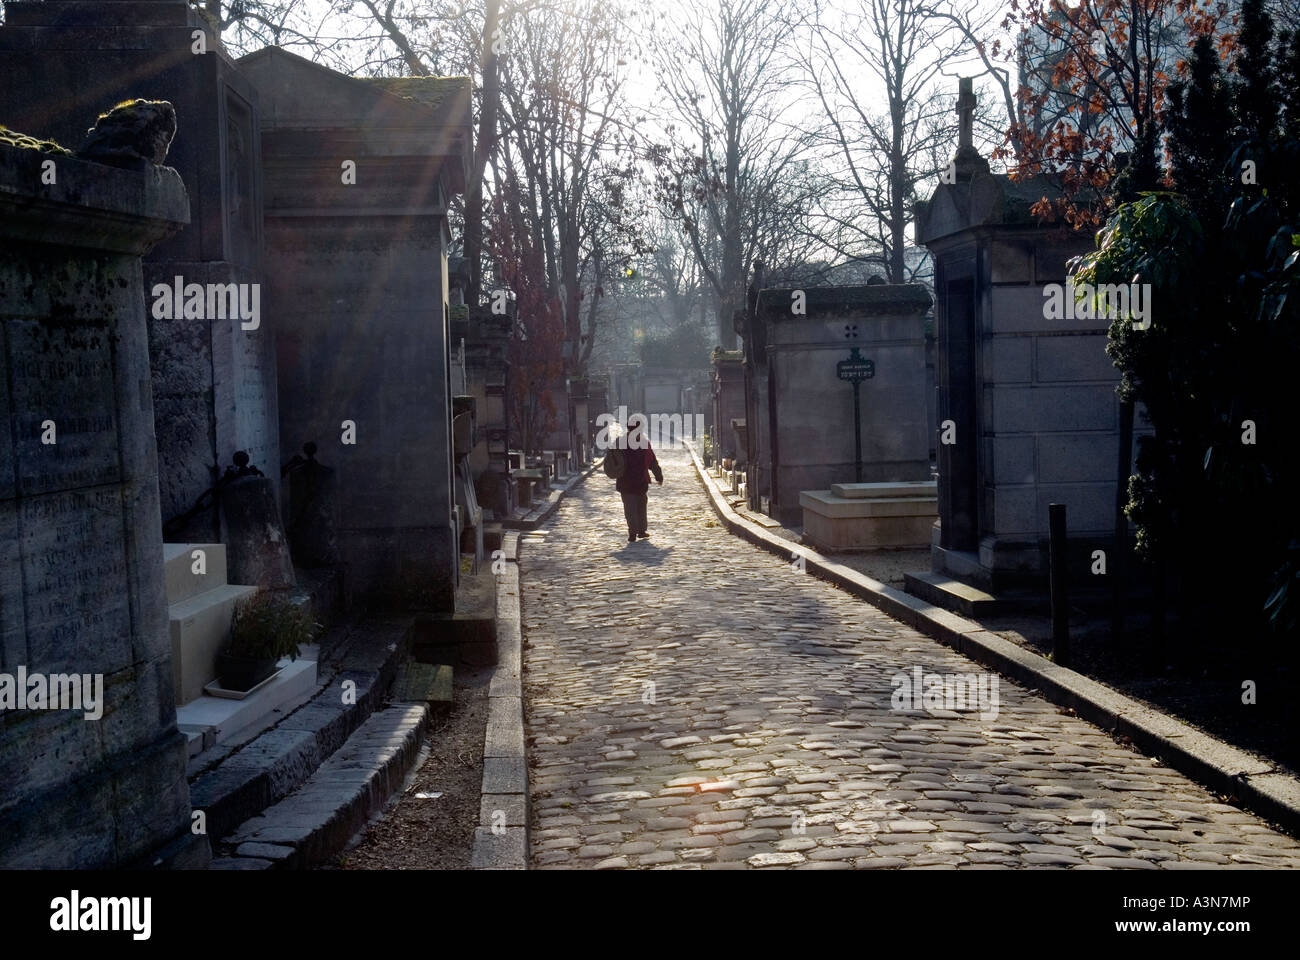 PARIS FRANCE PERE LACHAISE CEMETERY CIMETIERE DU PERE LACHAISE THE MOST FASHIONABLE PLACE TO BE LAID TO REST IN PARIS Stock Photo